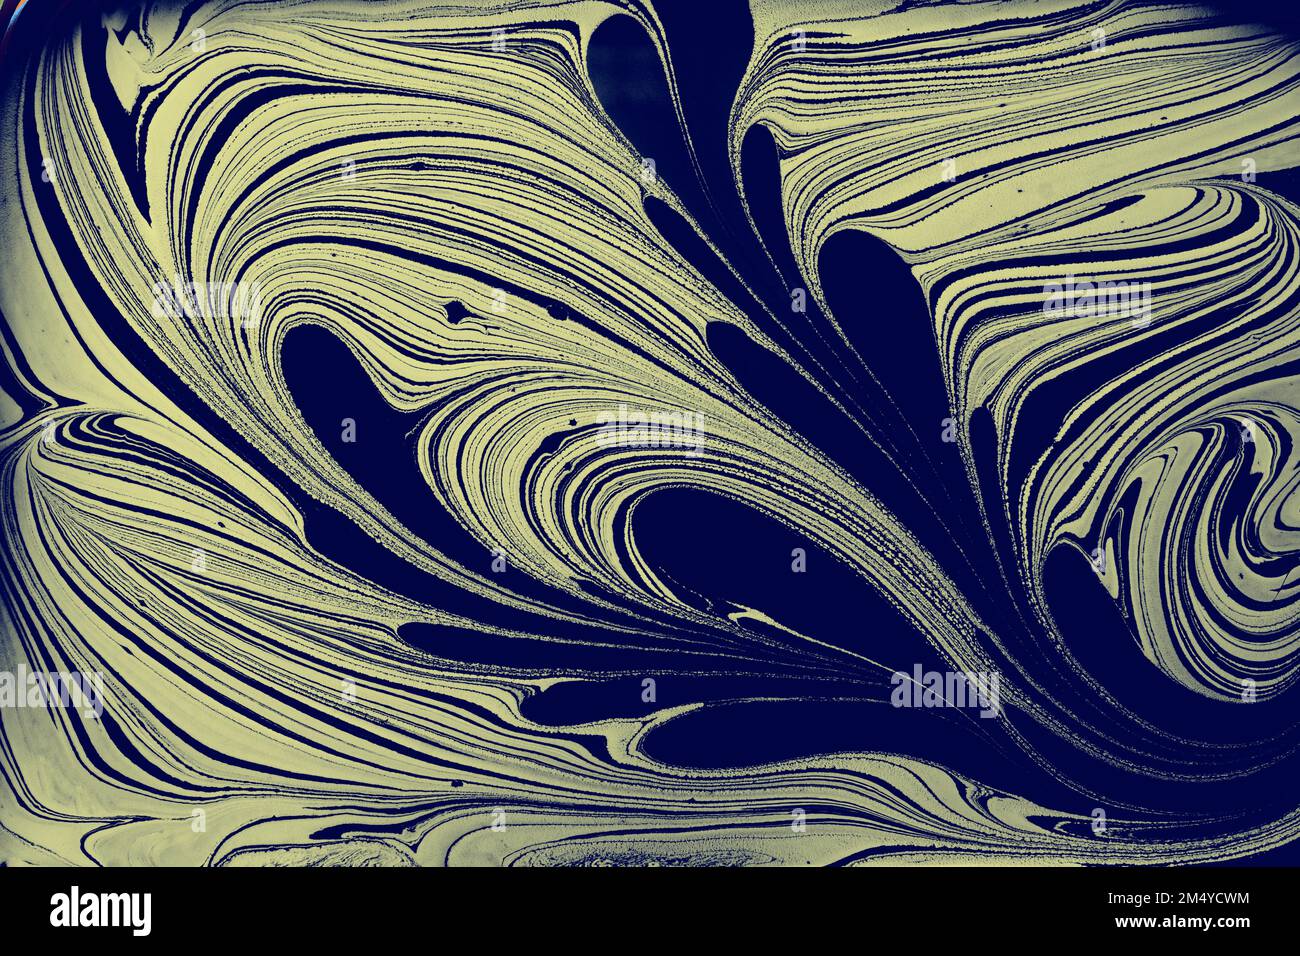 Abstract marbling floral pattern for fabric, tile design. background texture Stock Photo